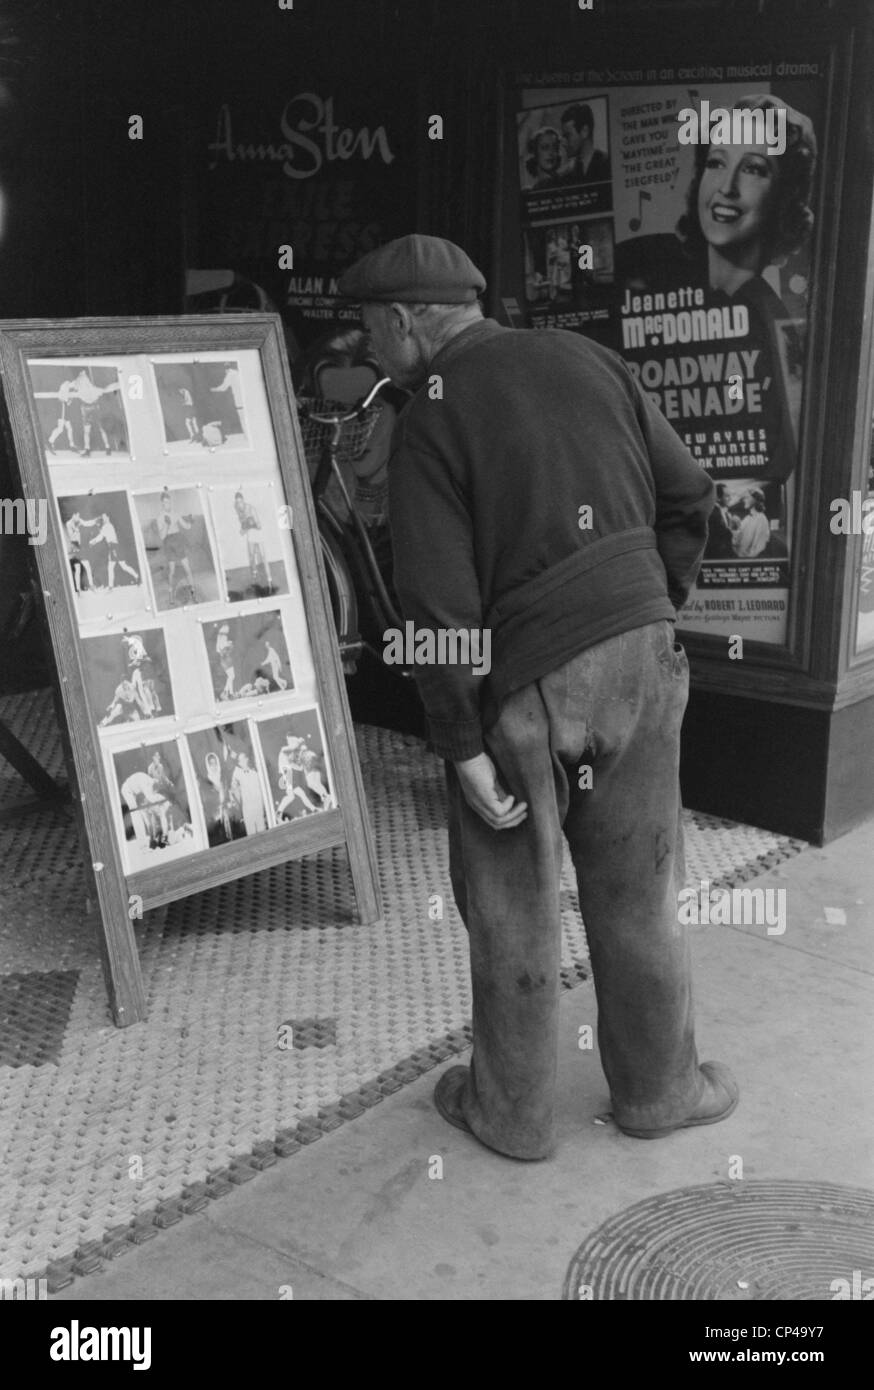 Elderly man with patches clothing looking at stills of Joe Lewis fight. Windsor Locks Connecticut. Oct. 1939. Stock Photo